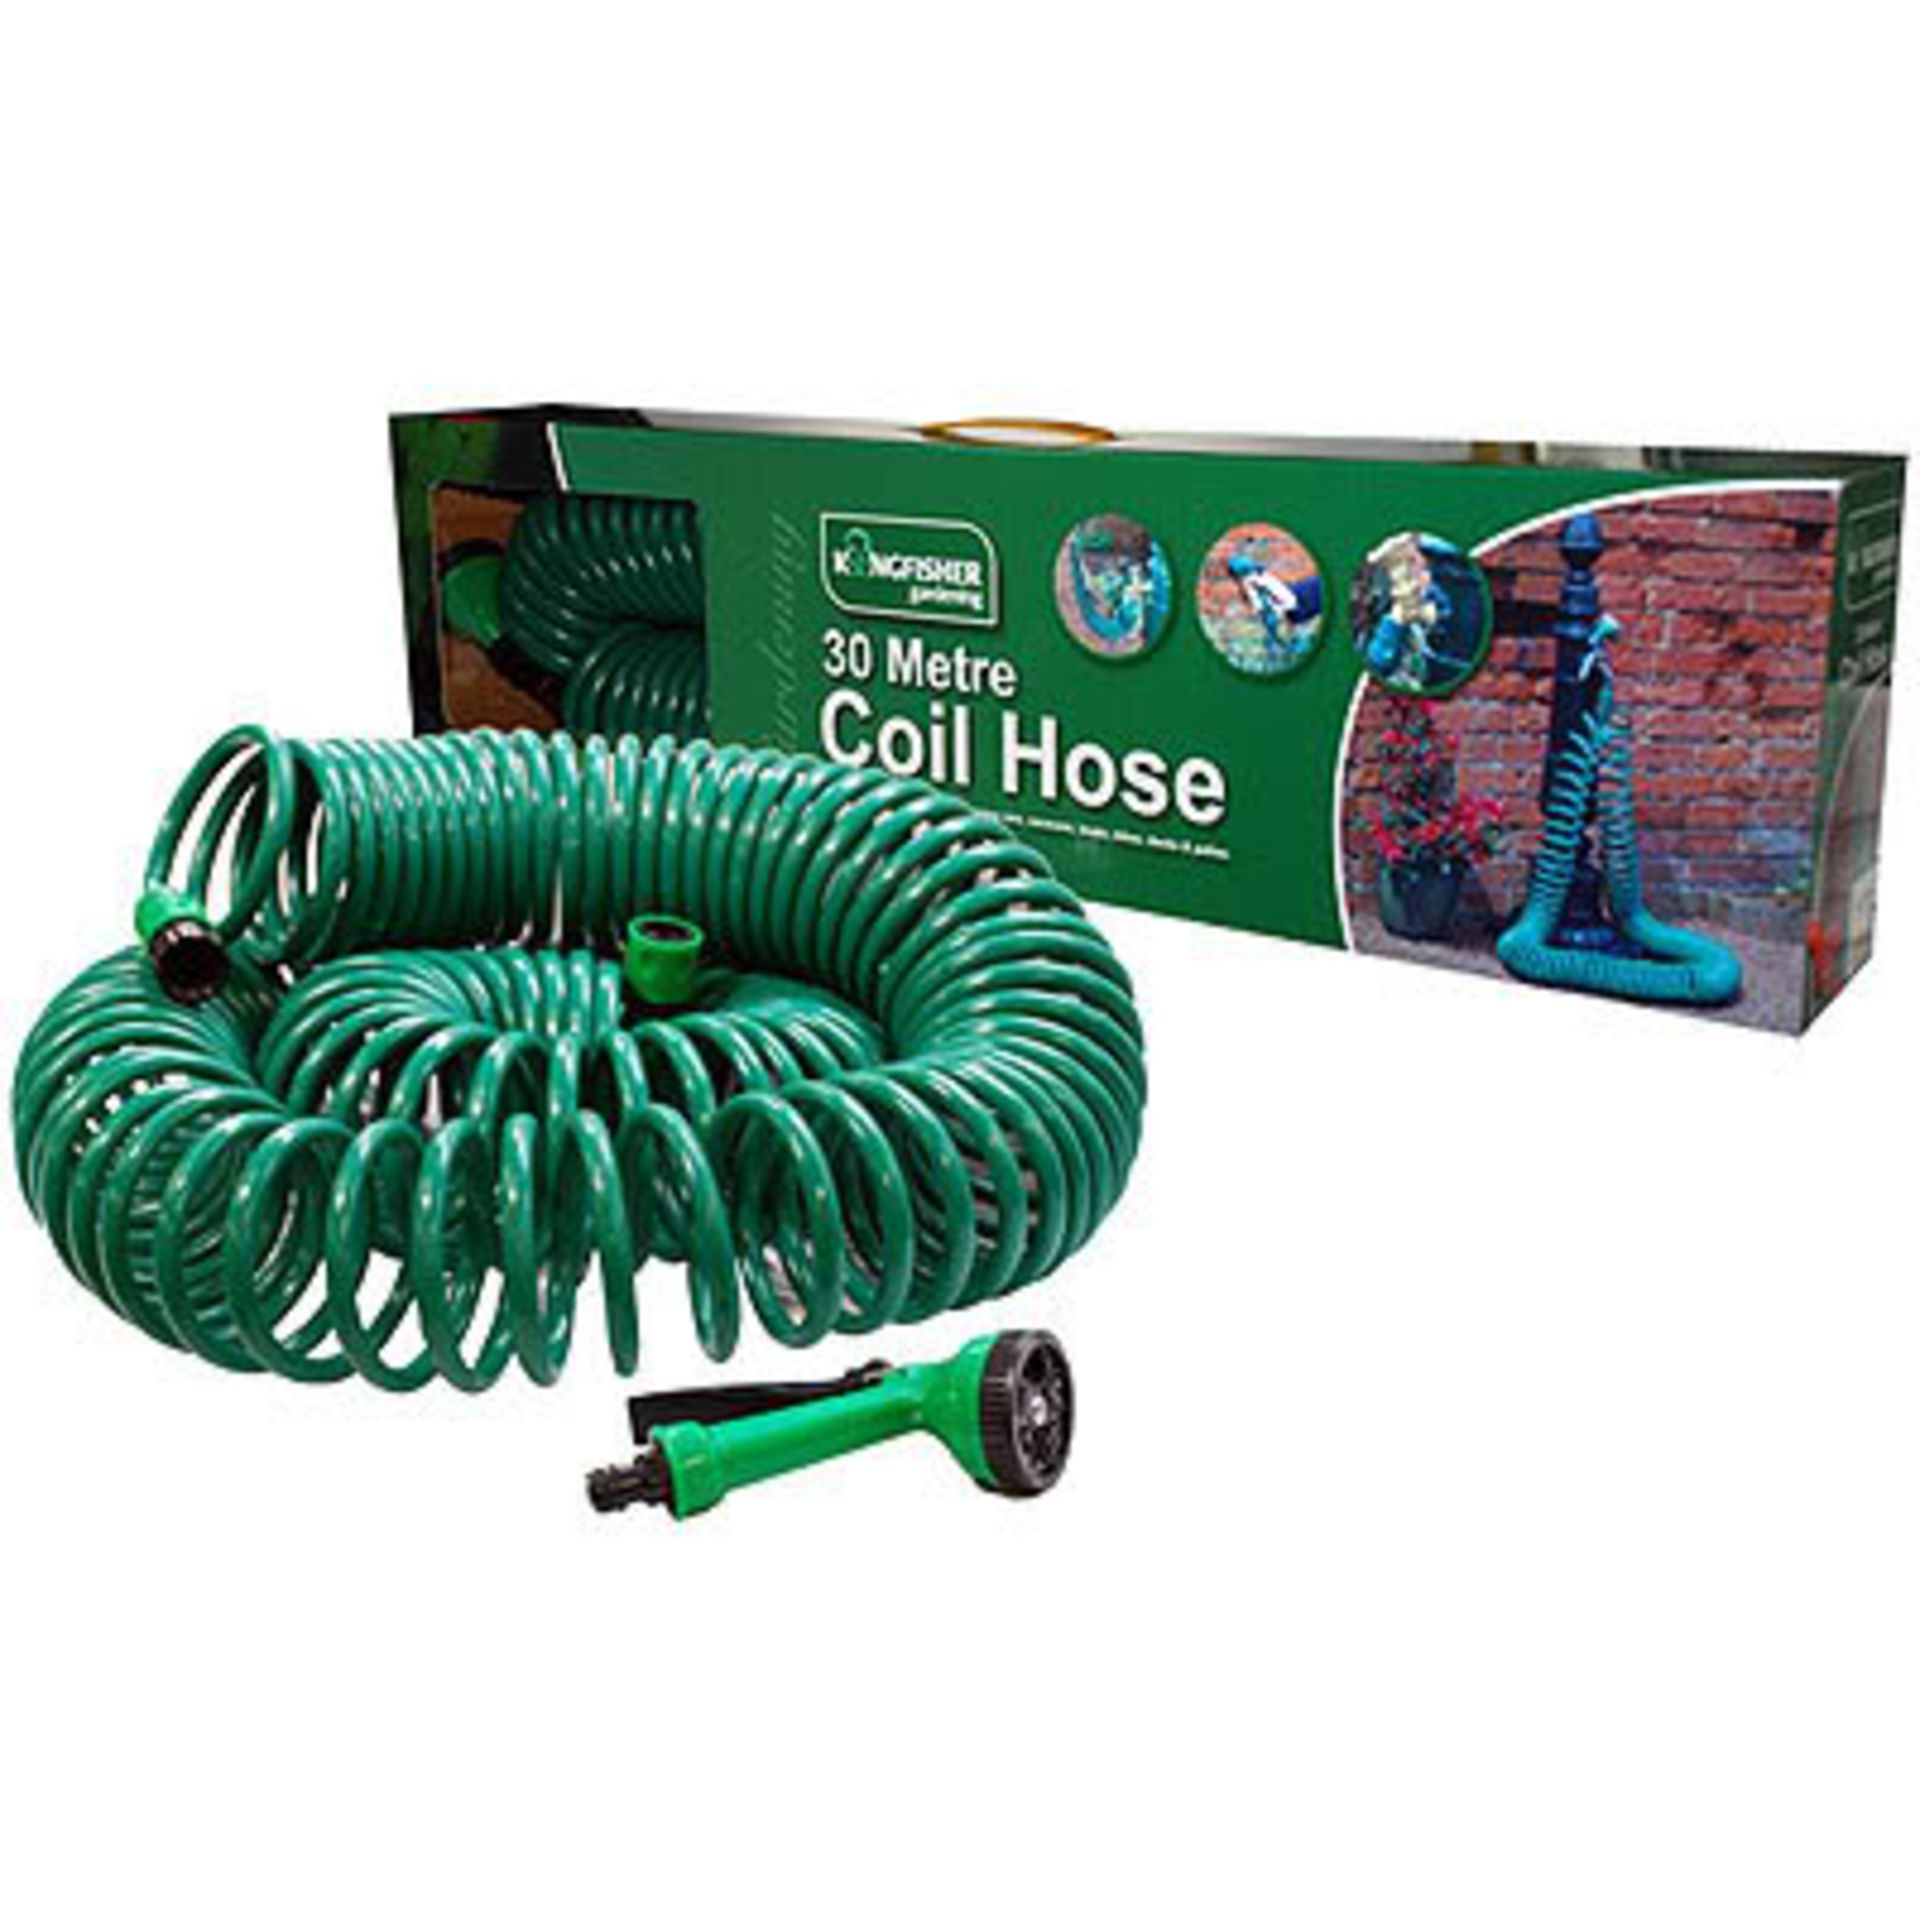 30 Metre Coil Hose With Nozzle And Tap Connectors Etc - Image 2 of 4